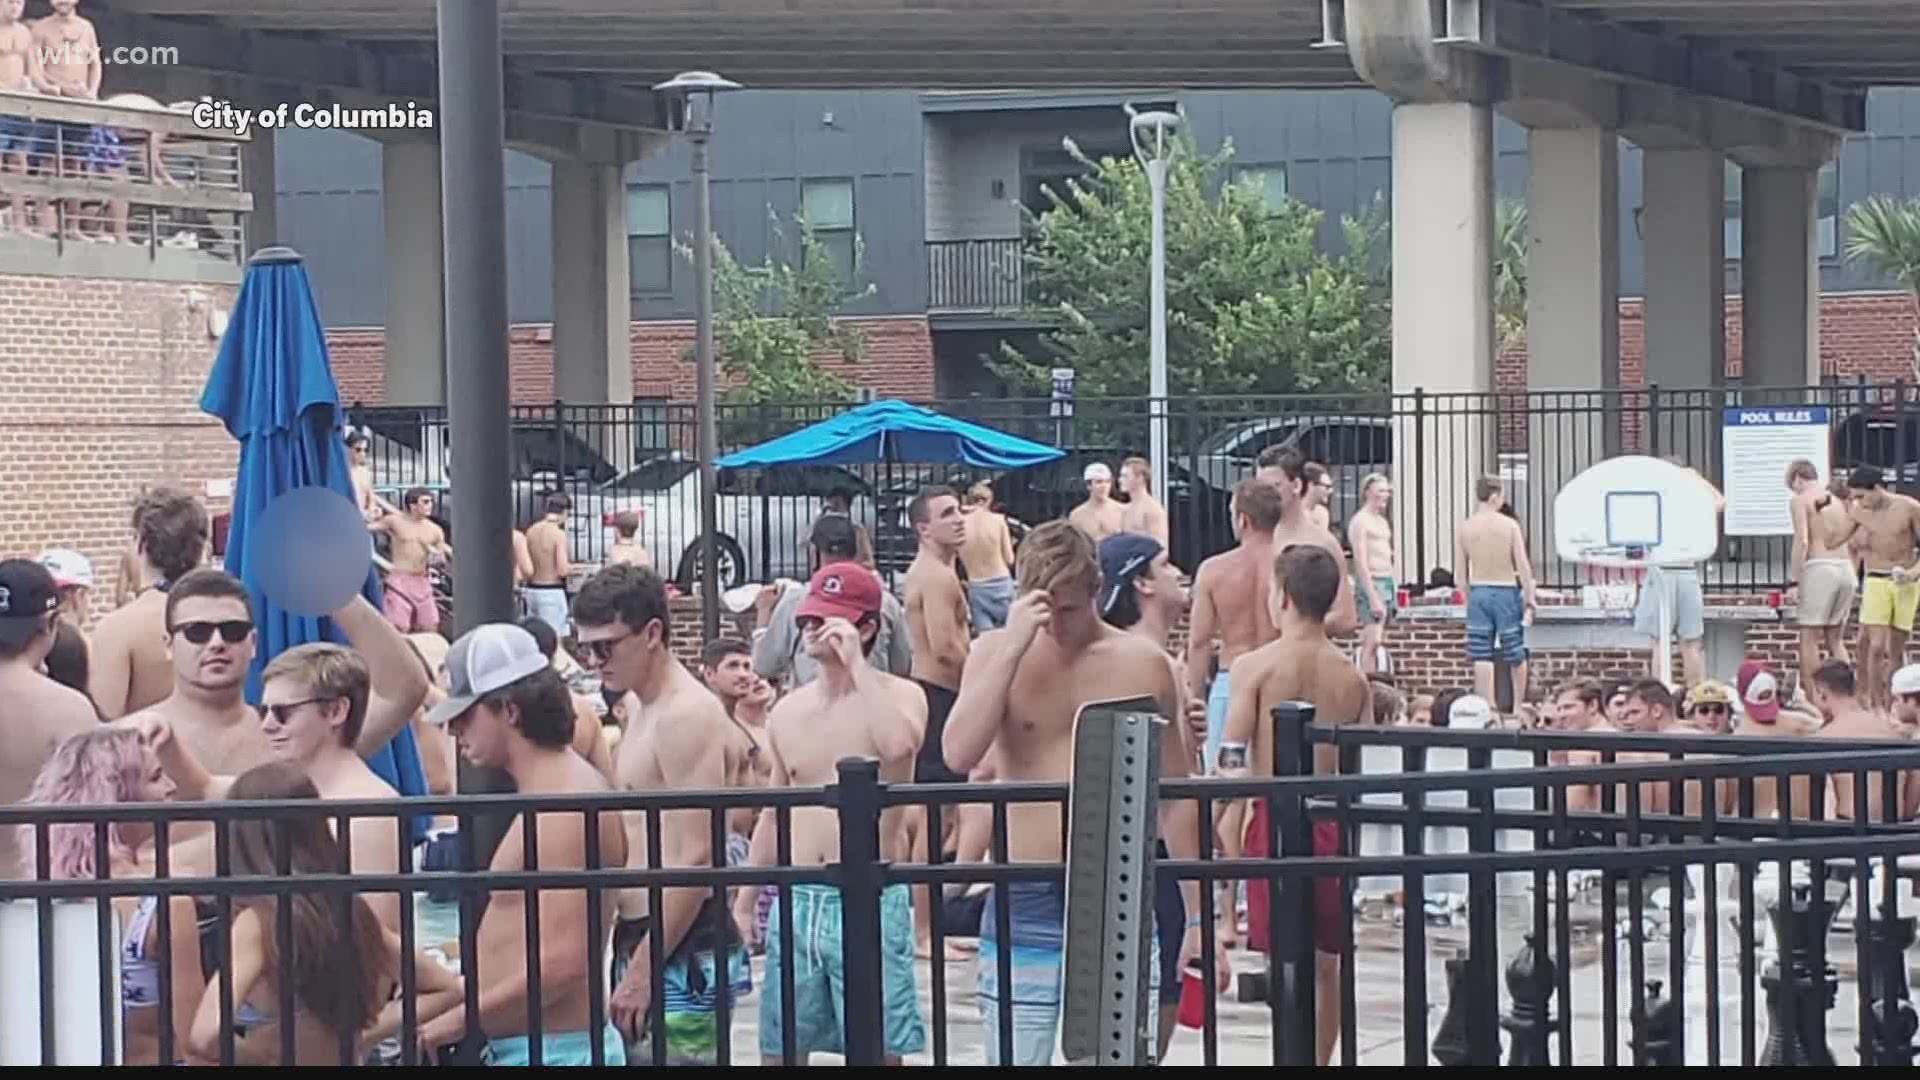 Just days after the city of Columbia passed an ordinance to ban house parties,  hundreds threw a pool party at a local apartment complex.